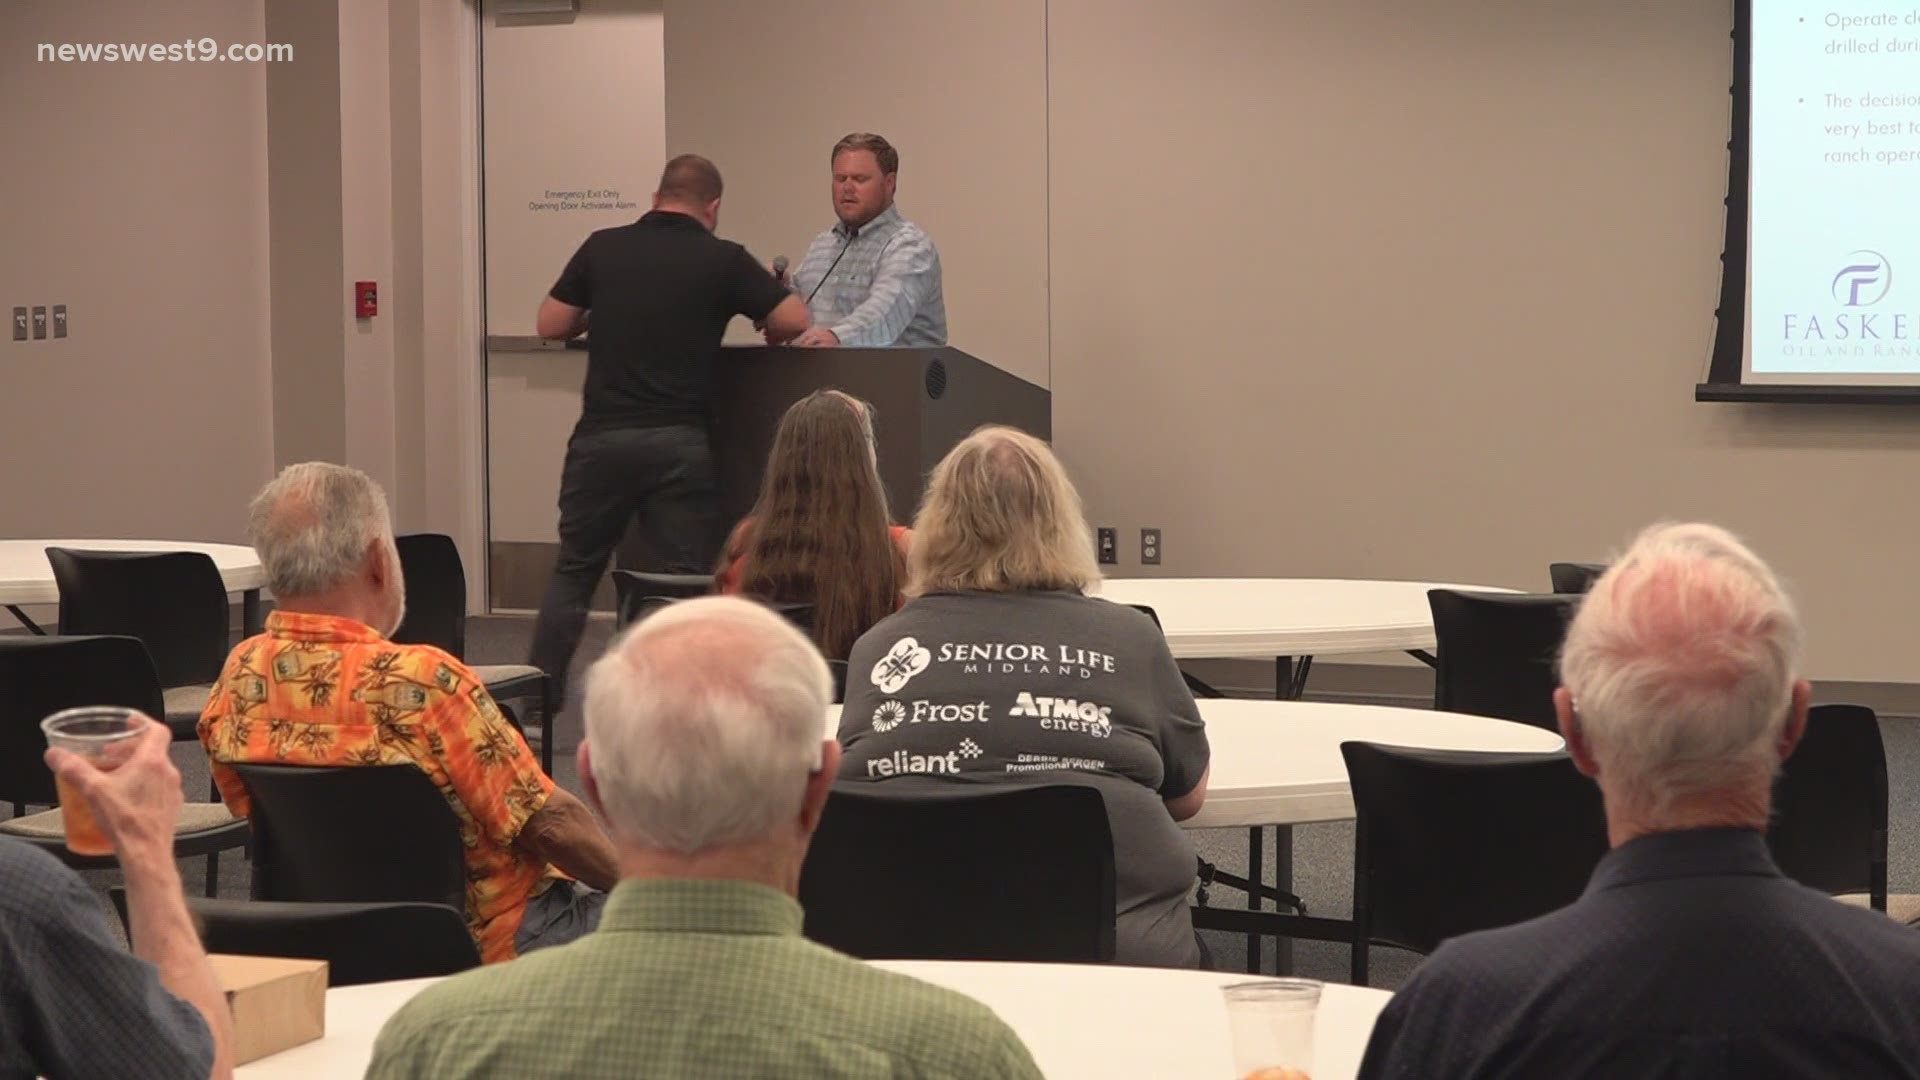 June's lecture discussed water operations in the Permian Basin and what oil and gas companies are doing to increase responsible usage and recycling.